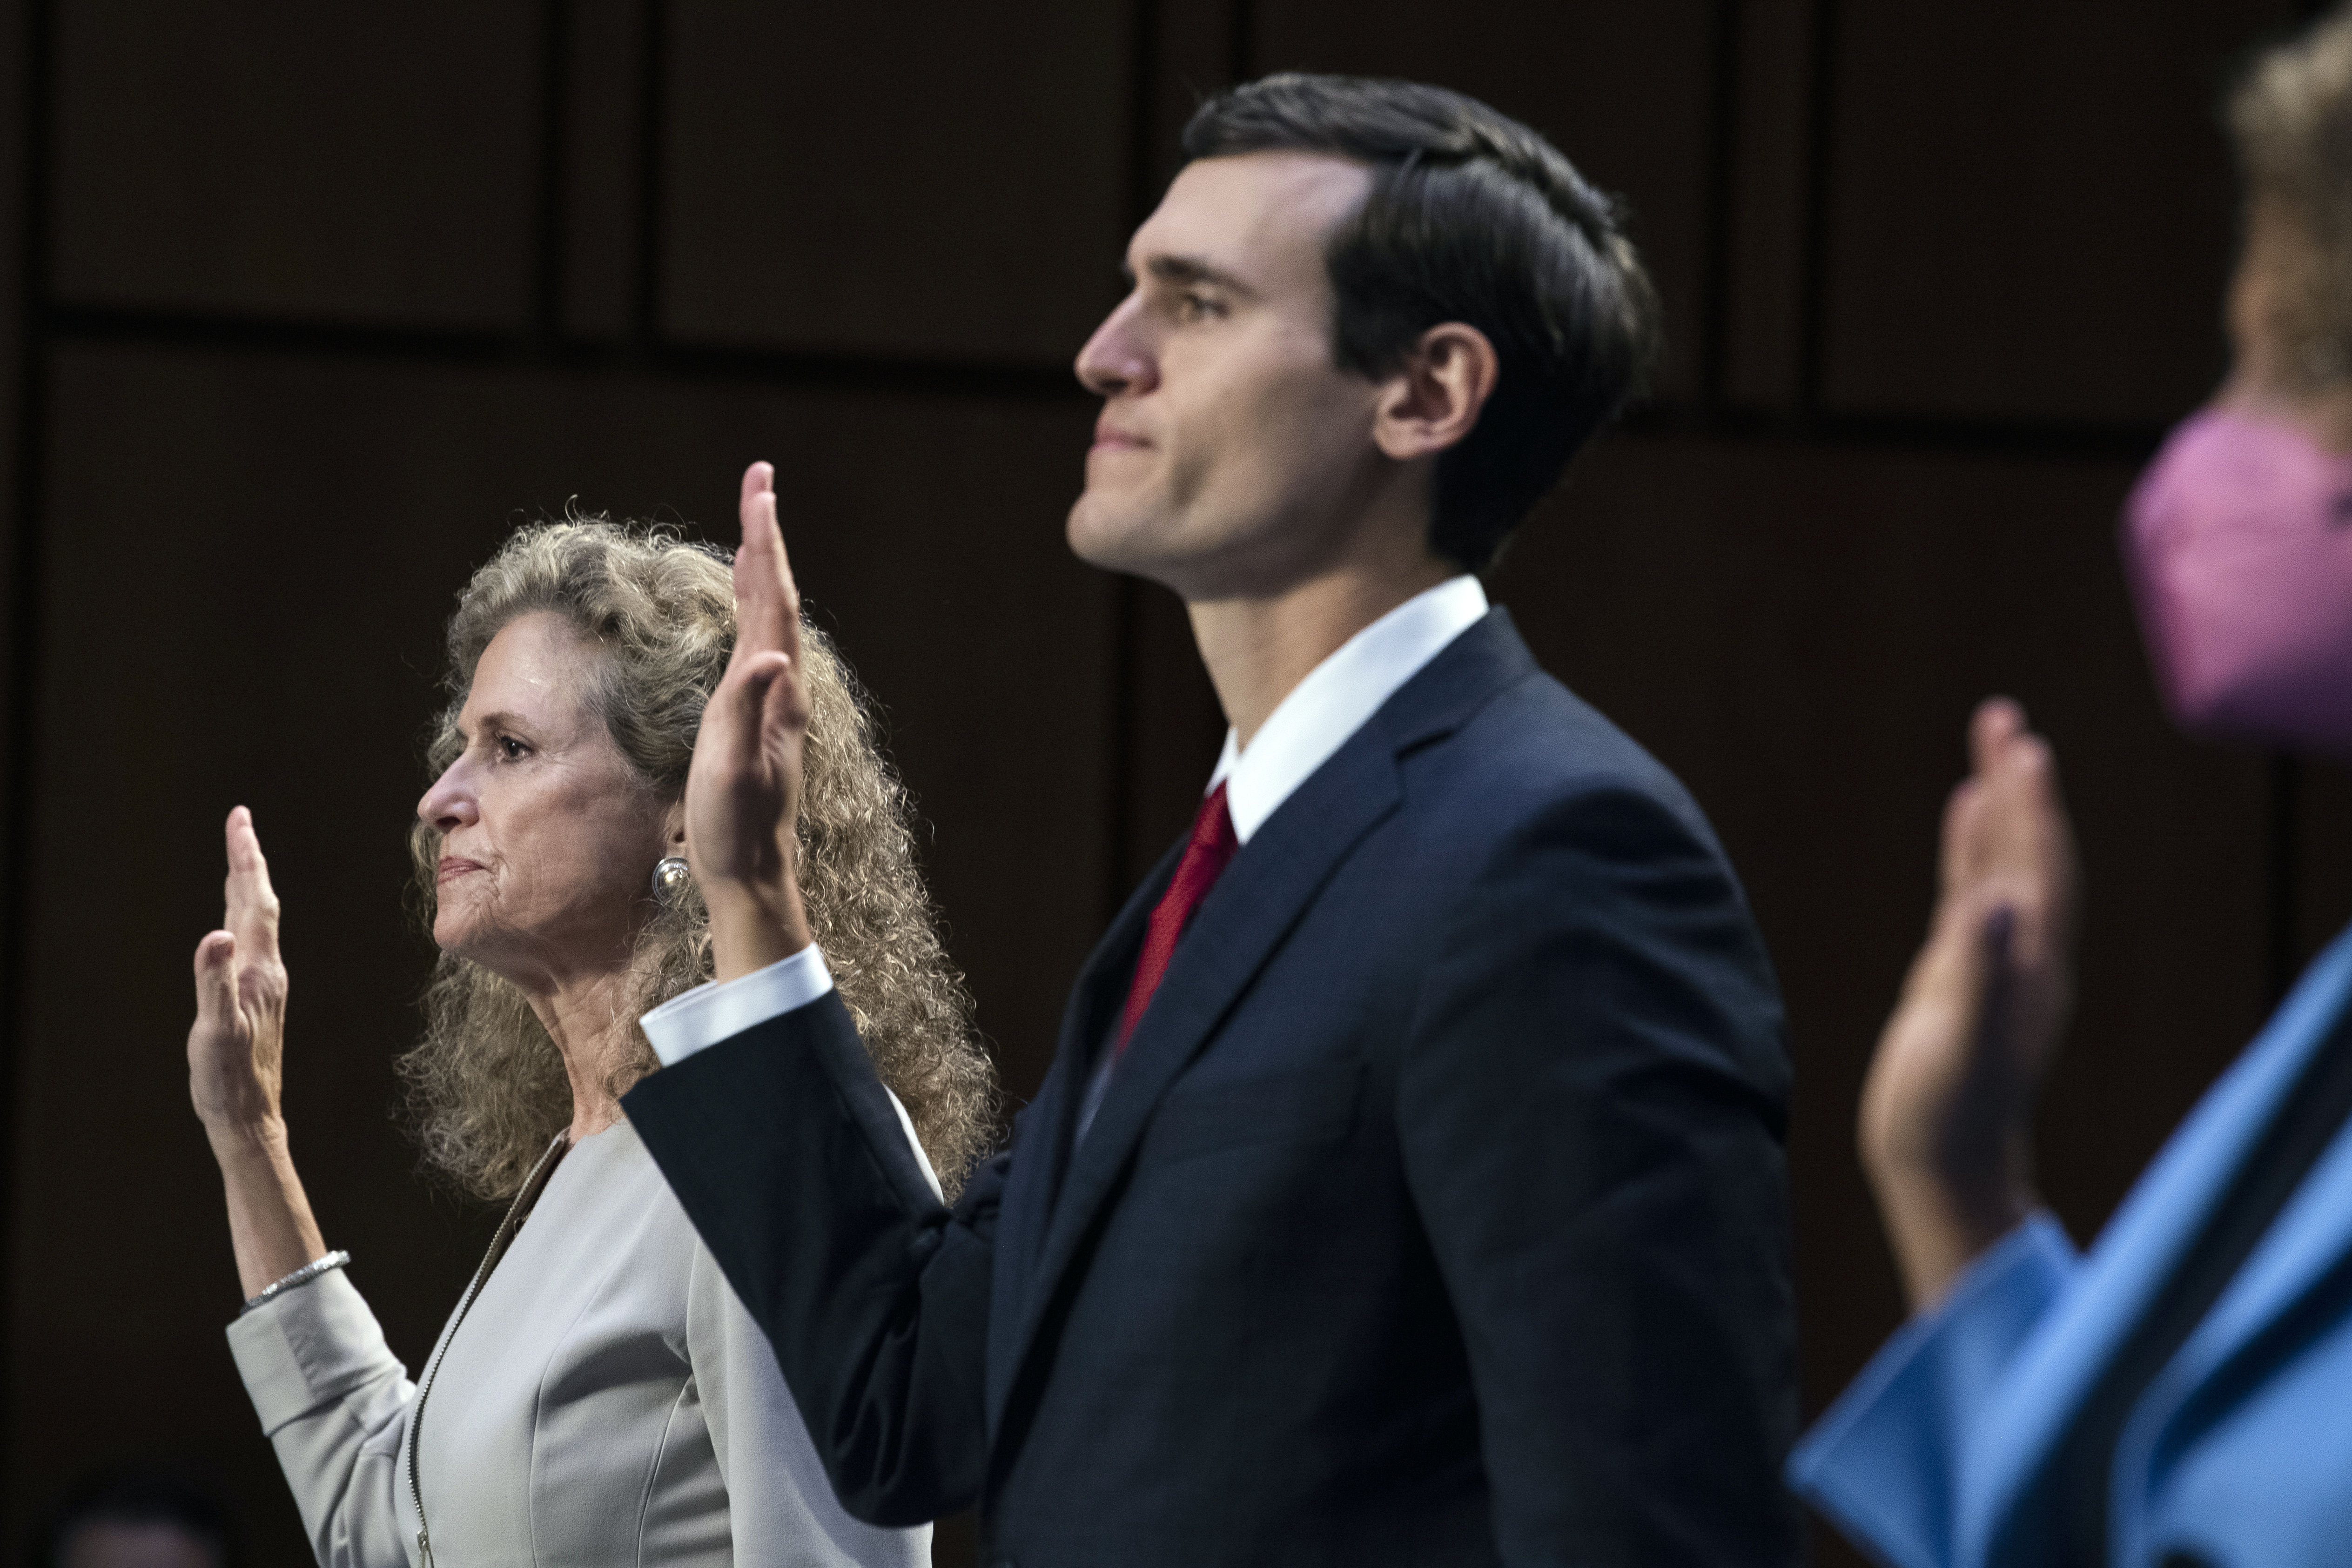 Witnesses are sworn in before a Senate Judiciary Committee Hearing on Texas’ abortion law.